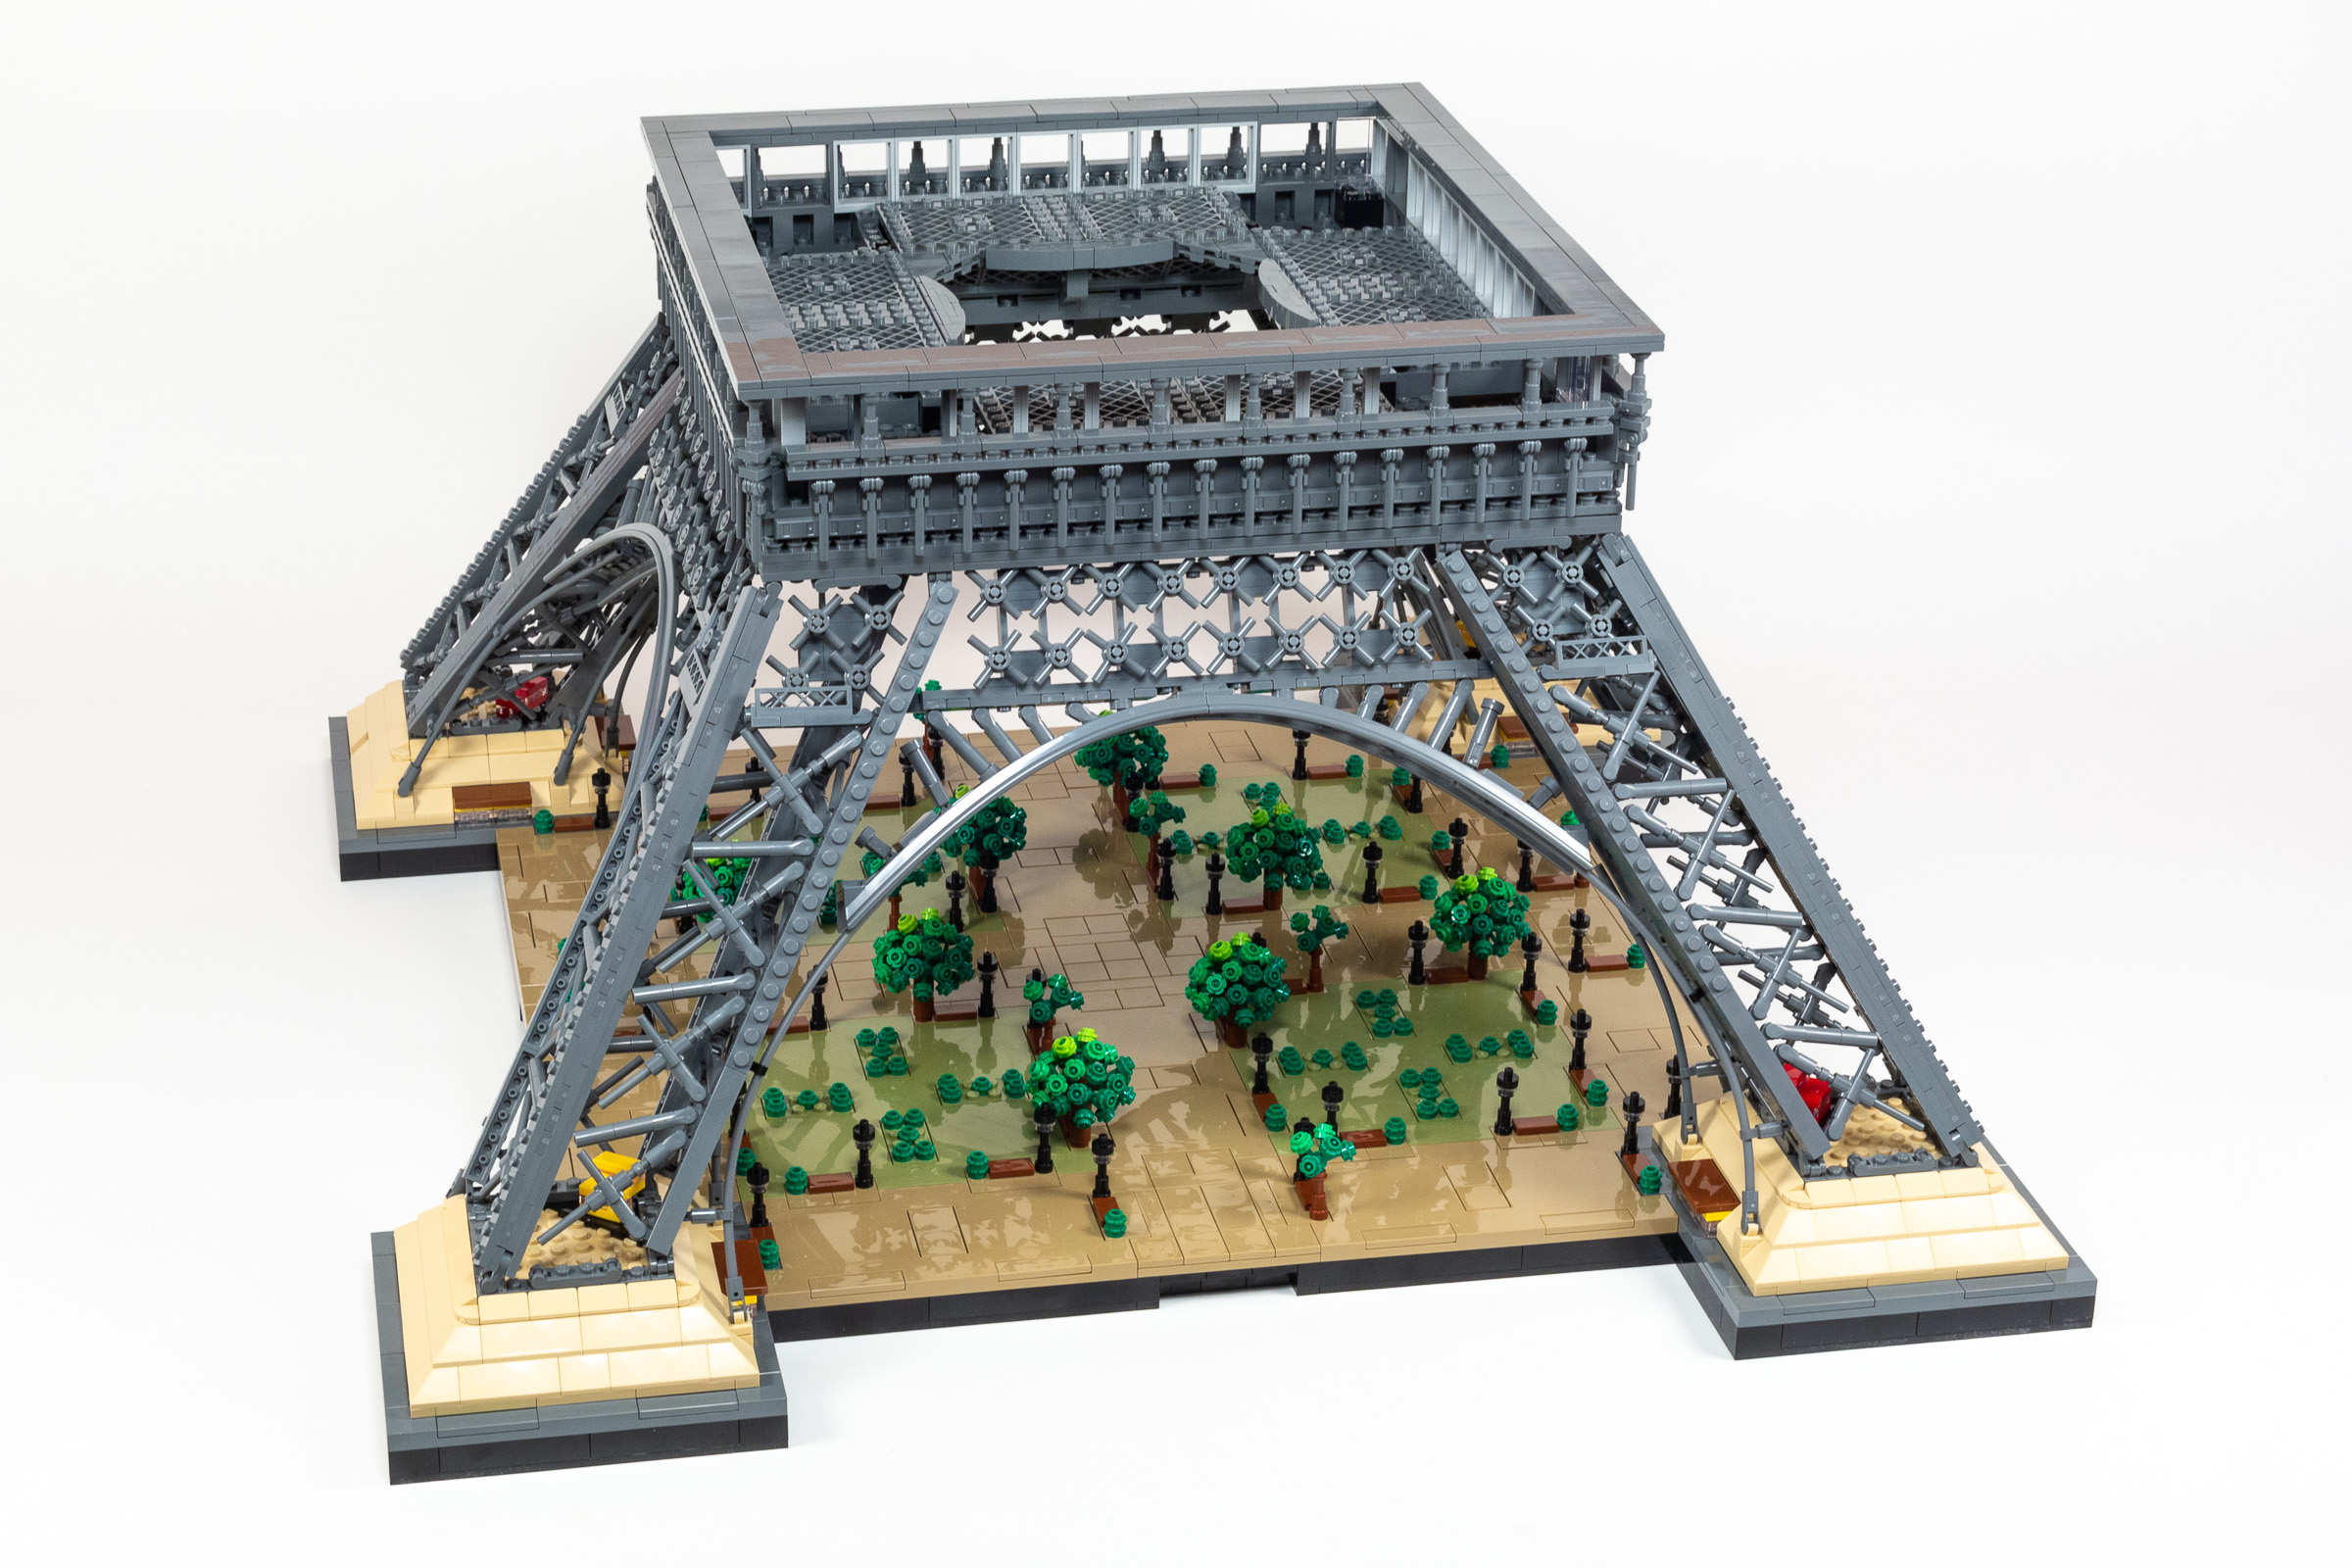 LEGO® ICONS™ review: 10307 Eiffel Tower  New Elementary: LEGO® parts, sets  and techniques